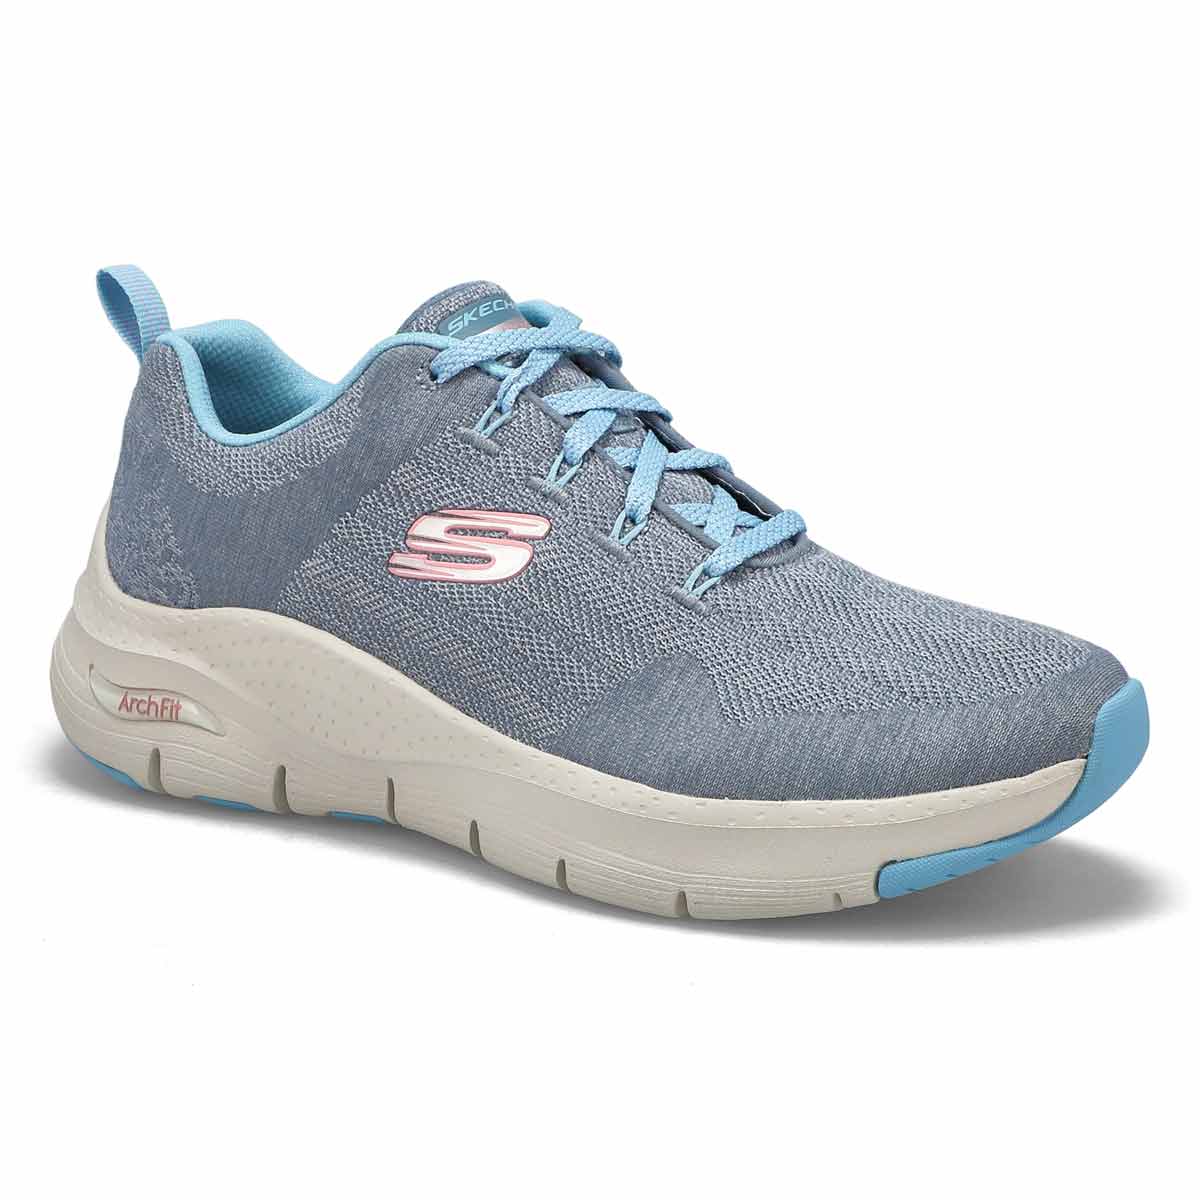 Skechers Women's Arch Comfy Wave sneakers | SoftMoc USA